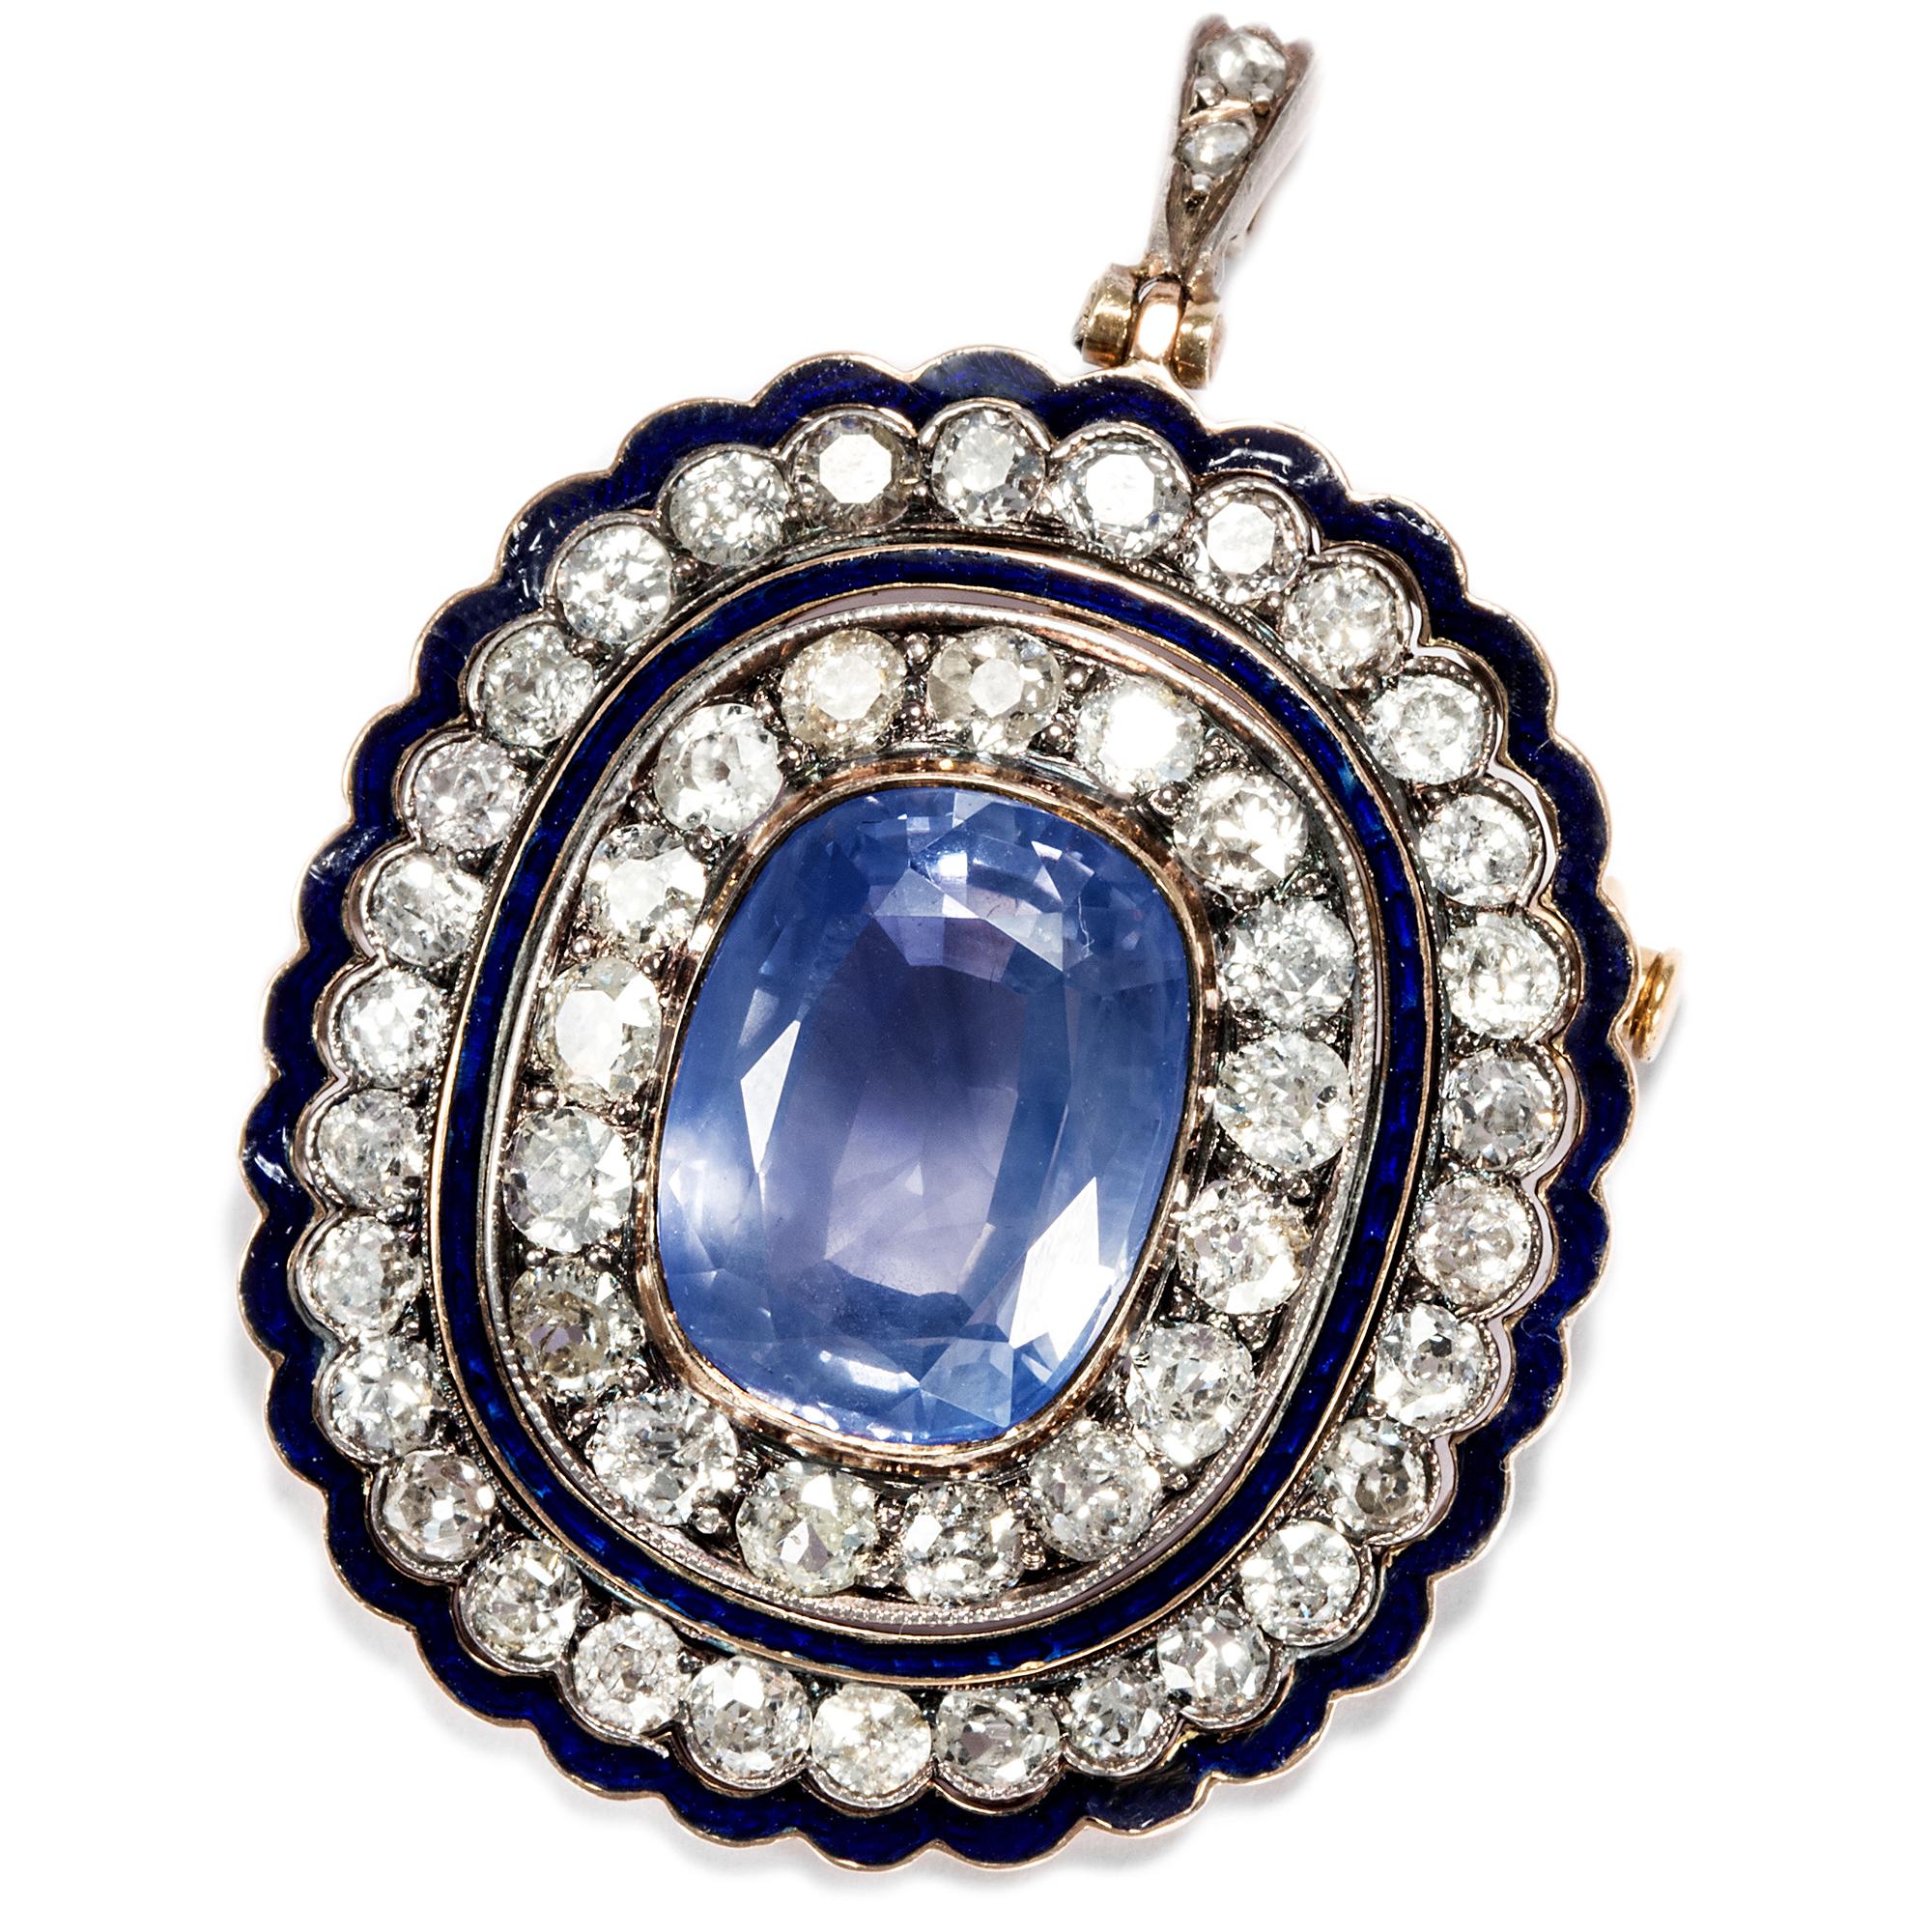 Unheated gemstones are rarities on today's market, making this 9.80 carat blue sapphire in its artful Belle Époque setting a veritable jewel. Due to a pin and retractable bail, the piece can be worn both as a brooch and a pendant.

The quality of